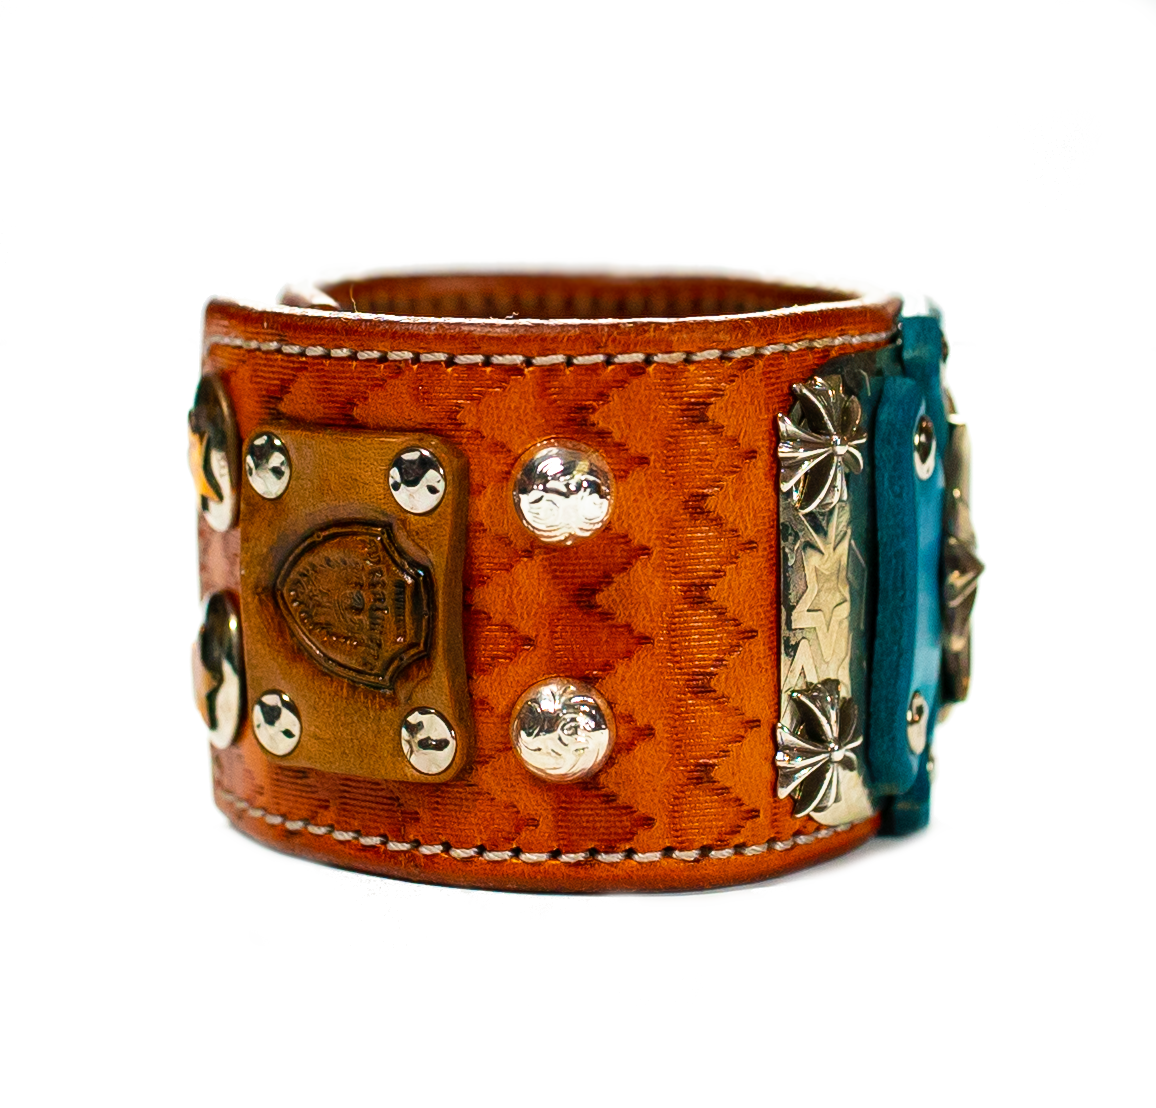 Sir Charles (Sterling Silver) - Turquoise on Brown Leather Bracelet left side